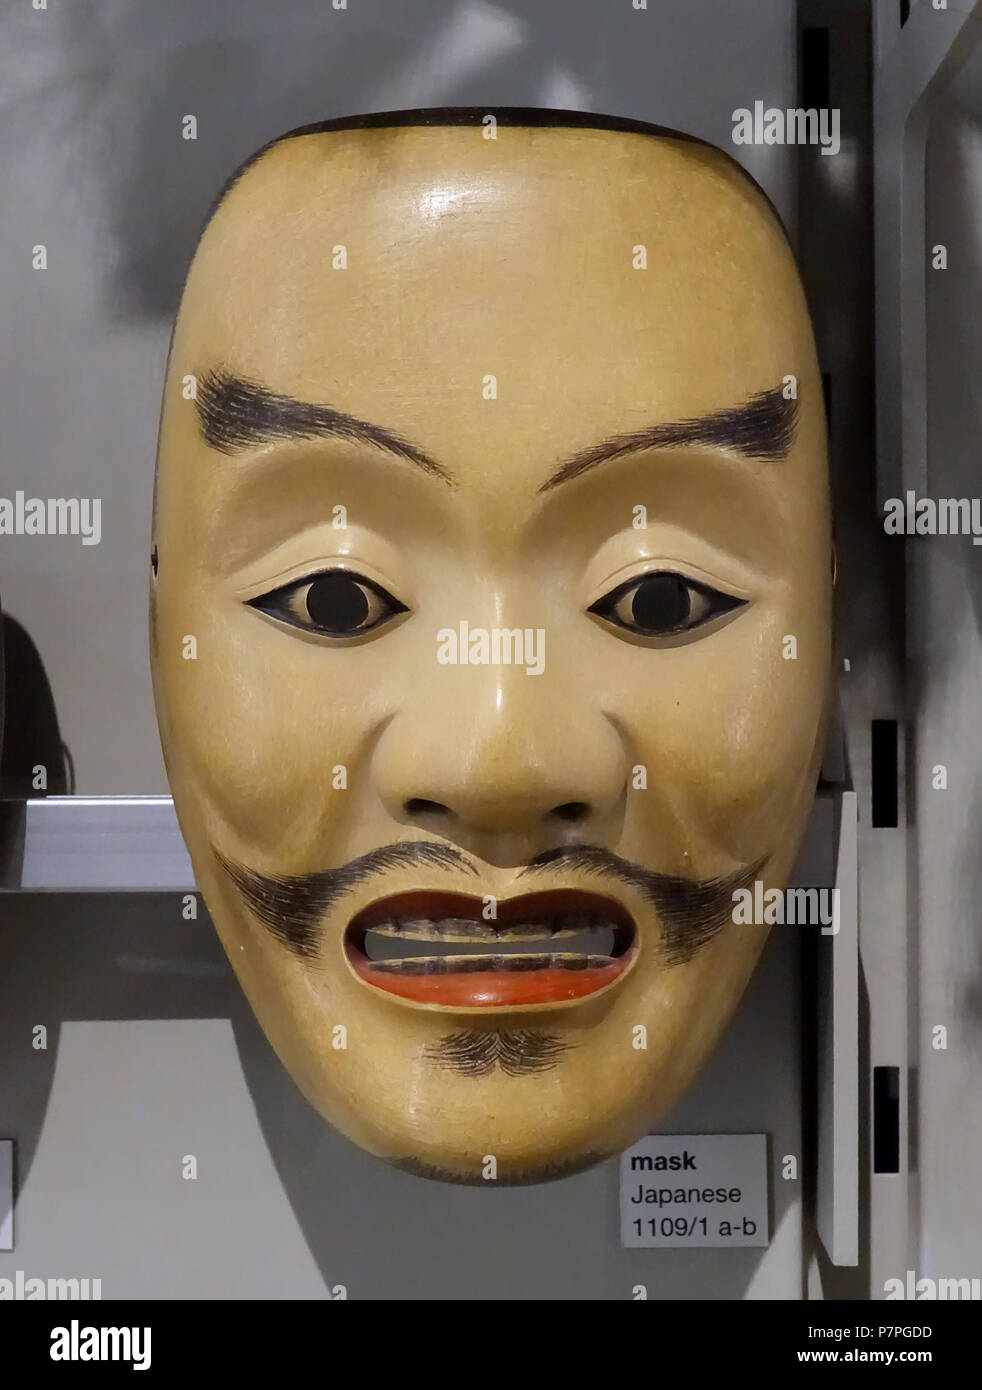 English: Exhibit in the Museum of Anthropology, University of British Columbia - Vancouver, British Columbia, Canada. 21 June 2015, 19:34:03 262 Mask, Japan - Museum of Anthropology, University of British Columbia - DSC09215 Stock Photo